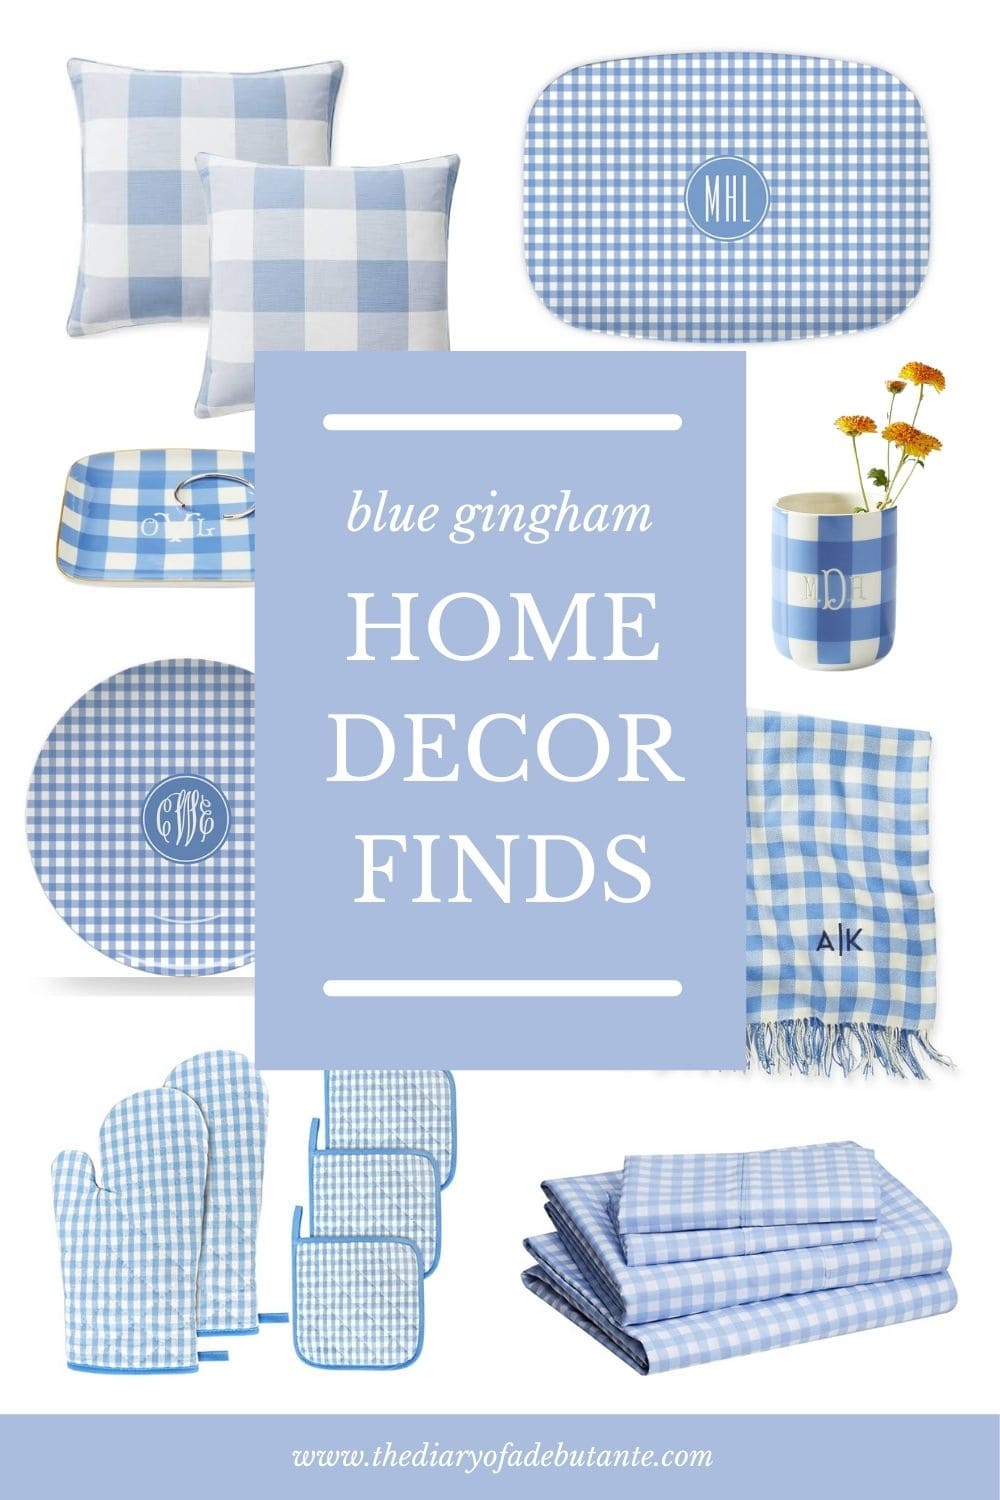 Blogger Stephanie Ziajka rounds up light blue gingham home decor finds for summer on Diary of a Debutante